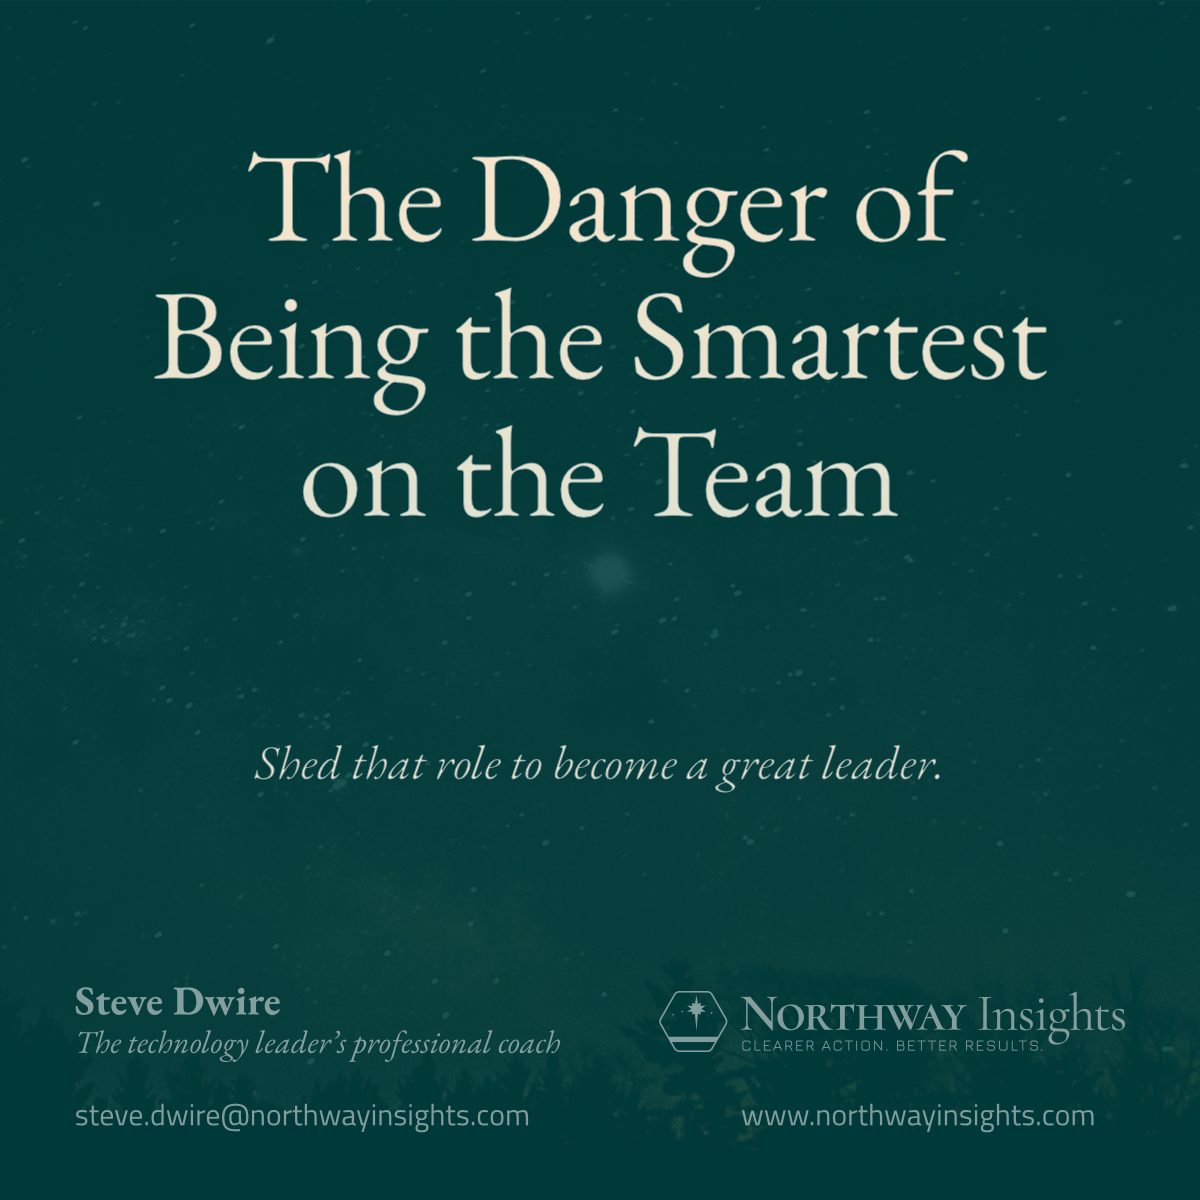 The Danger of Being The Smartest on the Team (Shed that role to become a great leader.)